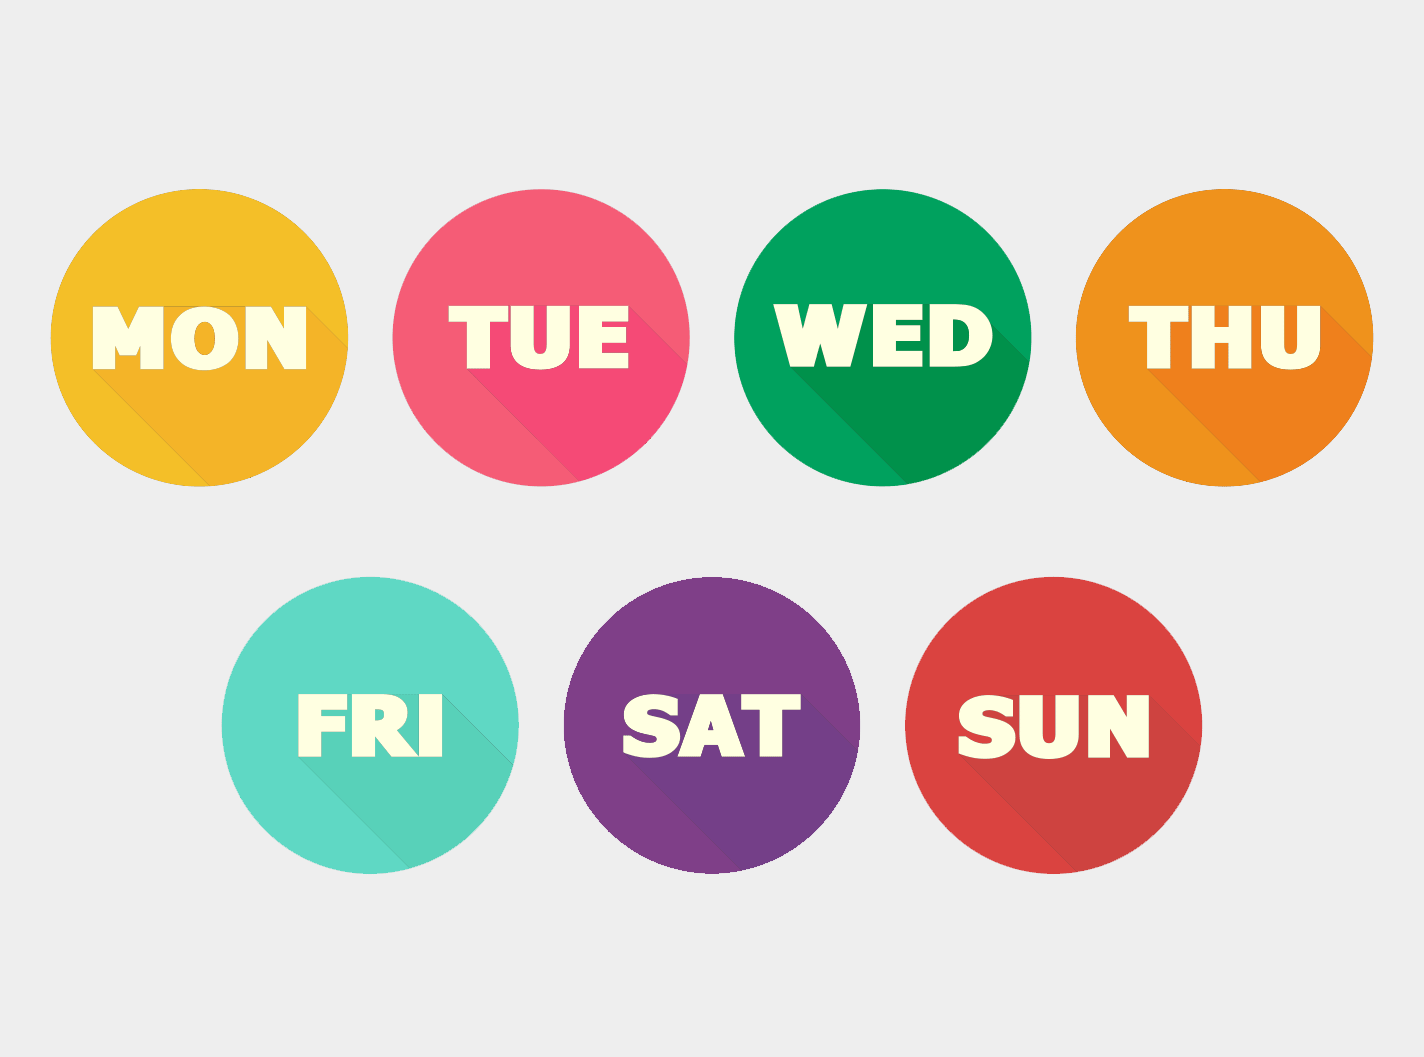 Days of the Week in Finnish